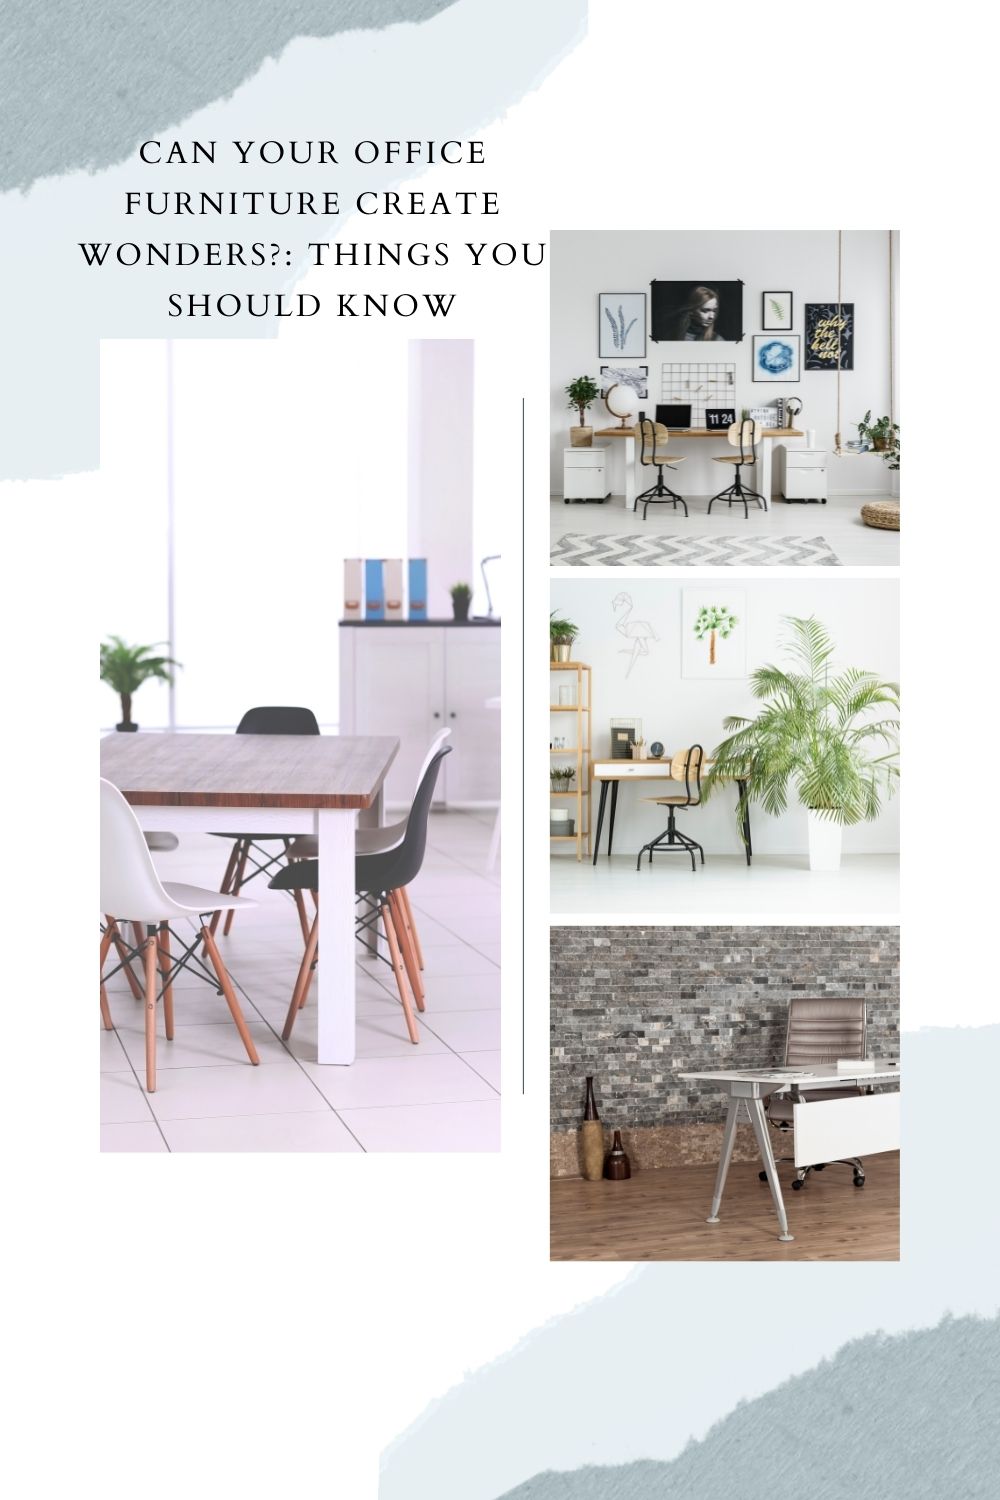 CAN YOUR OFFICE FURNITURE CREATE WONDERS - THINGS YOU SHOULD KNOW